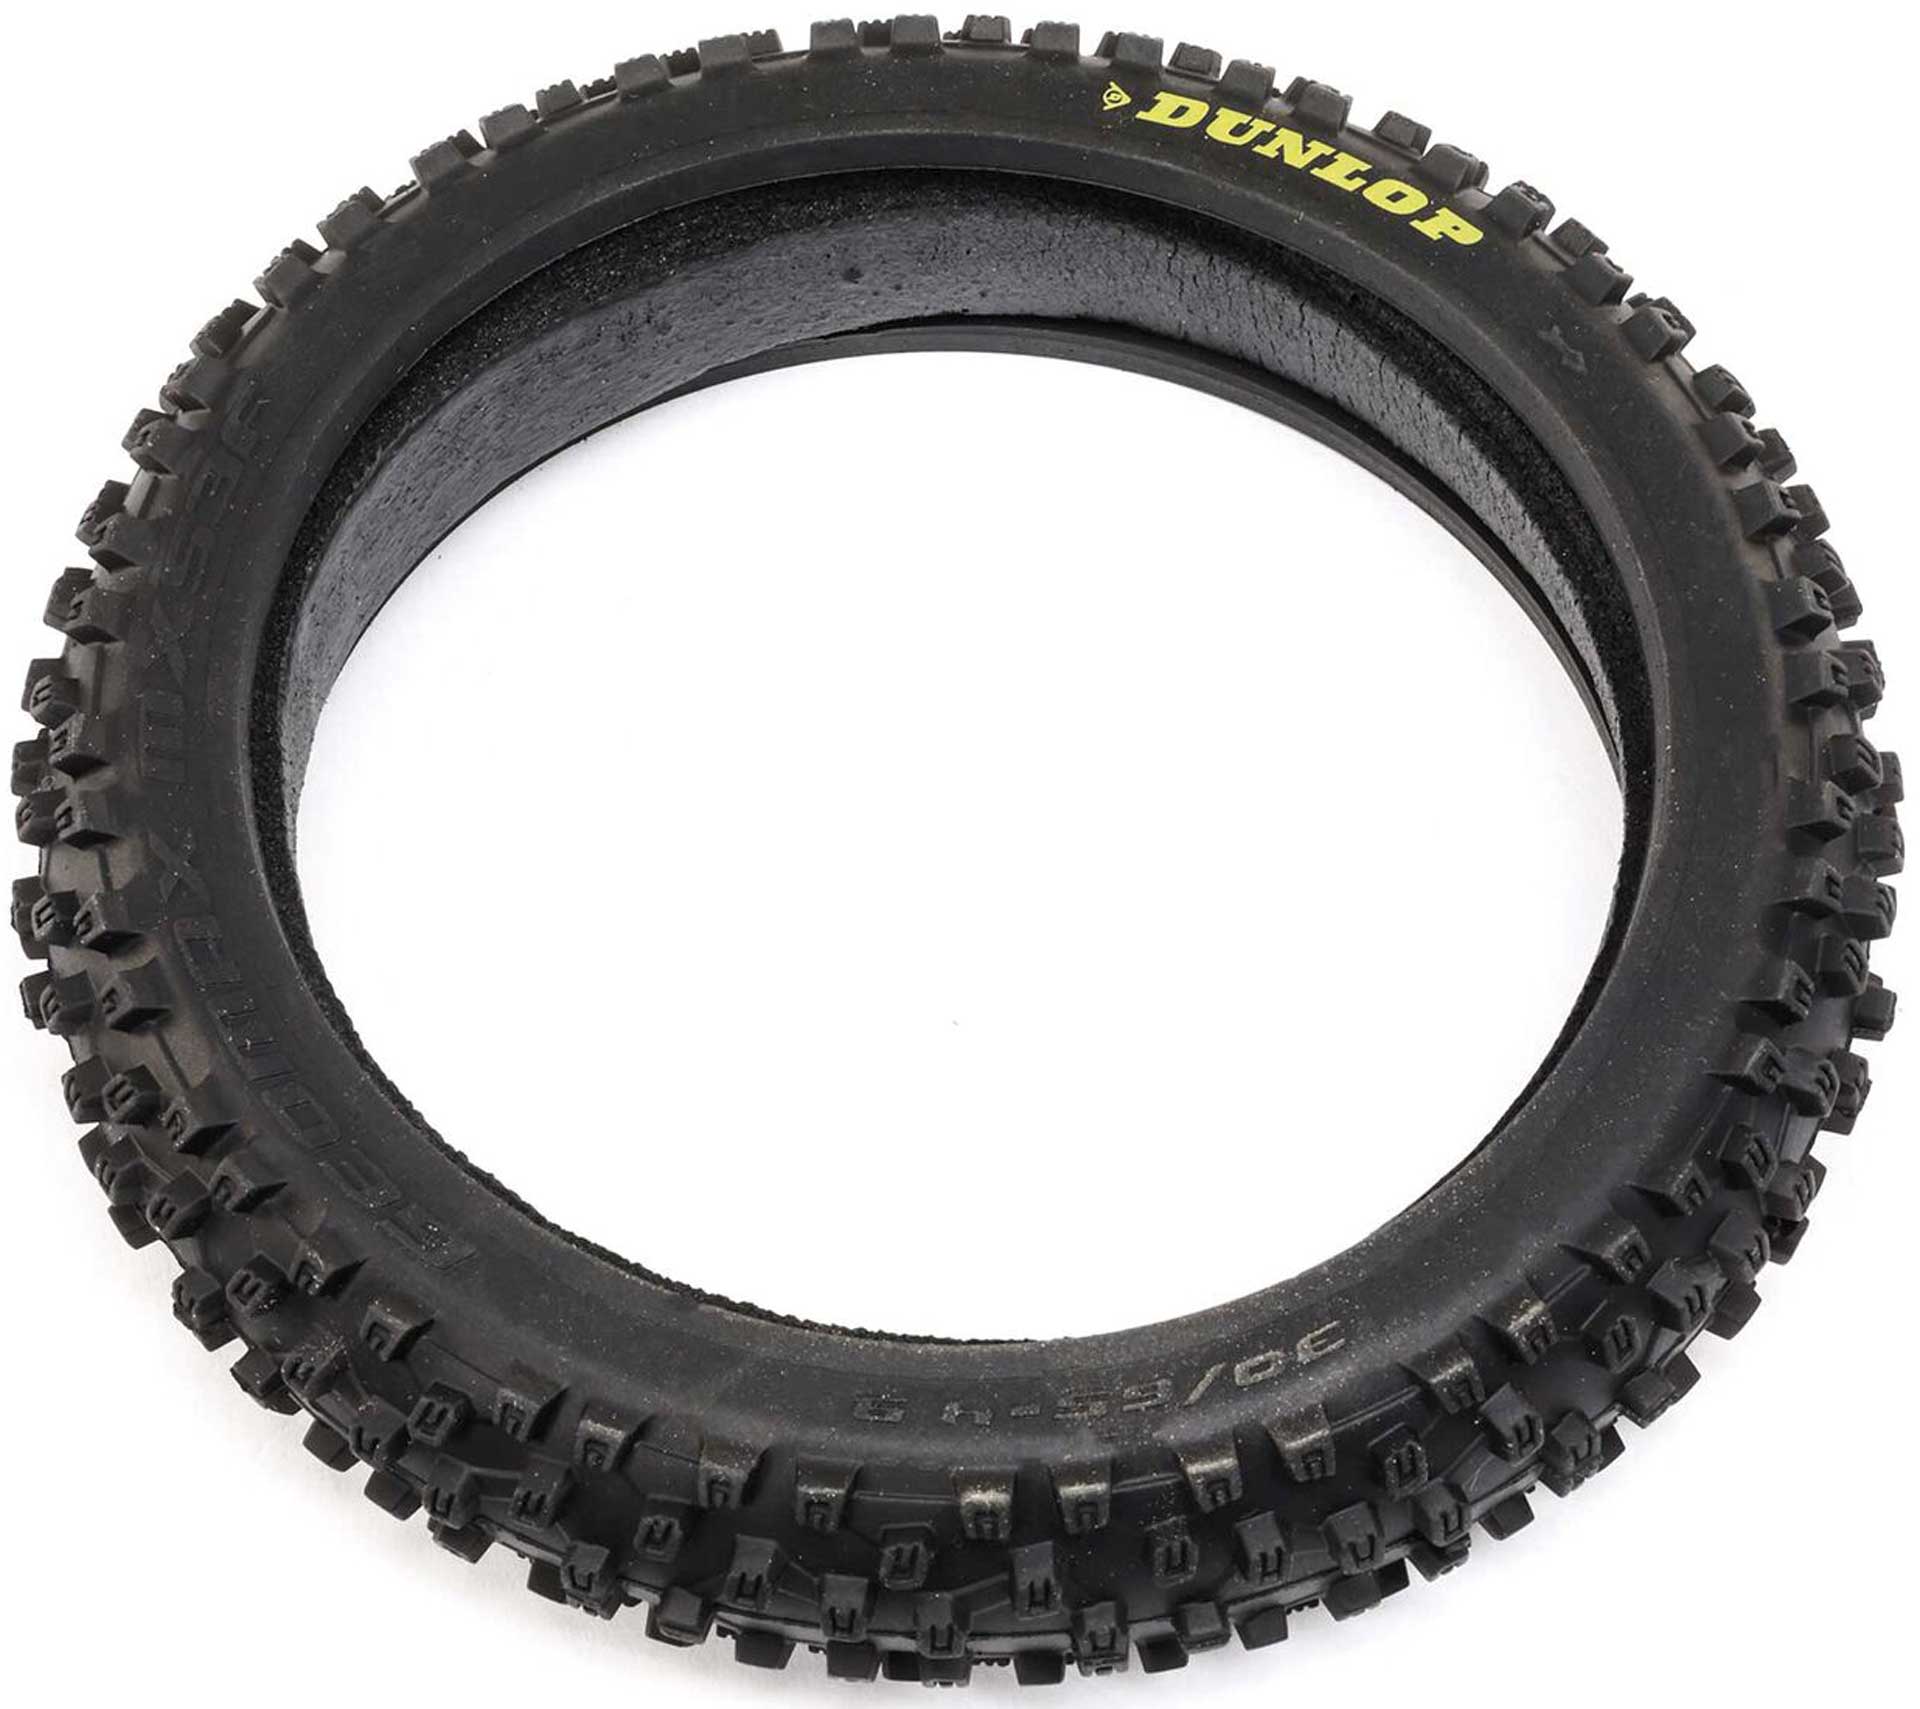 LOSI Dunlop MX53 Front Tire with Foam, 60 Shore: Promoto-MX